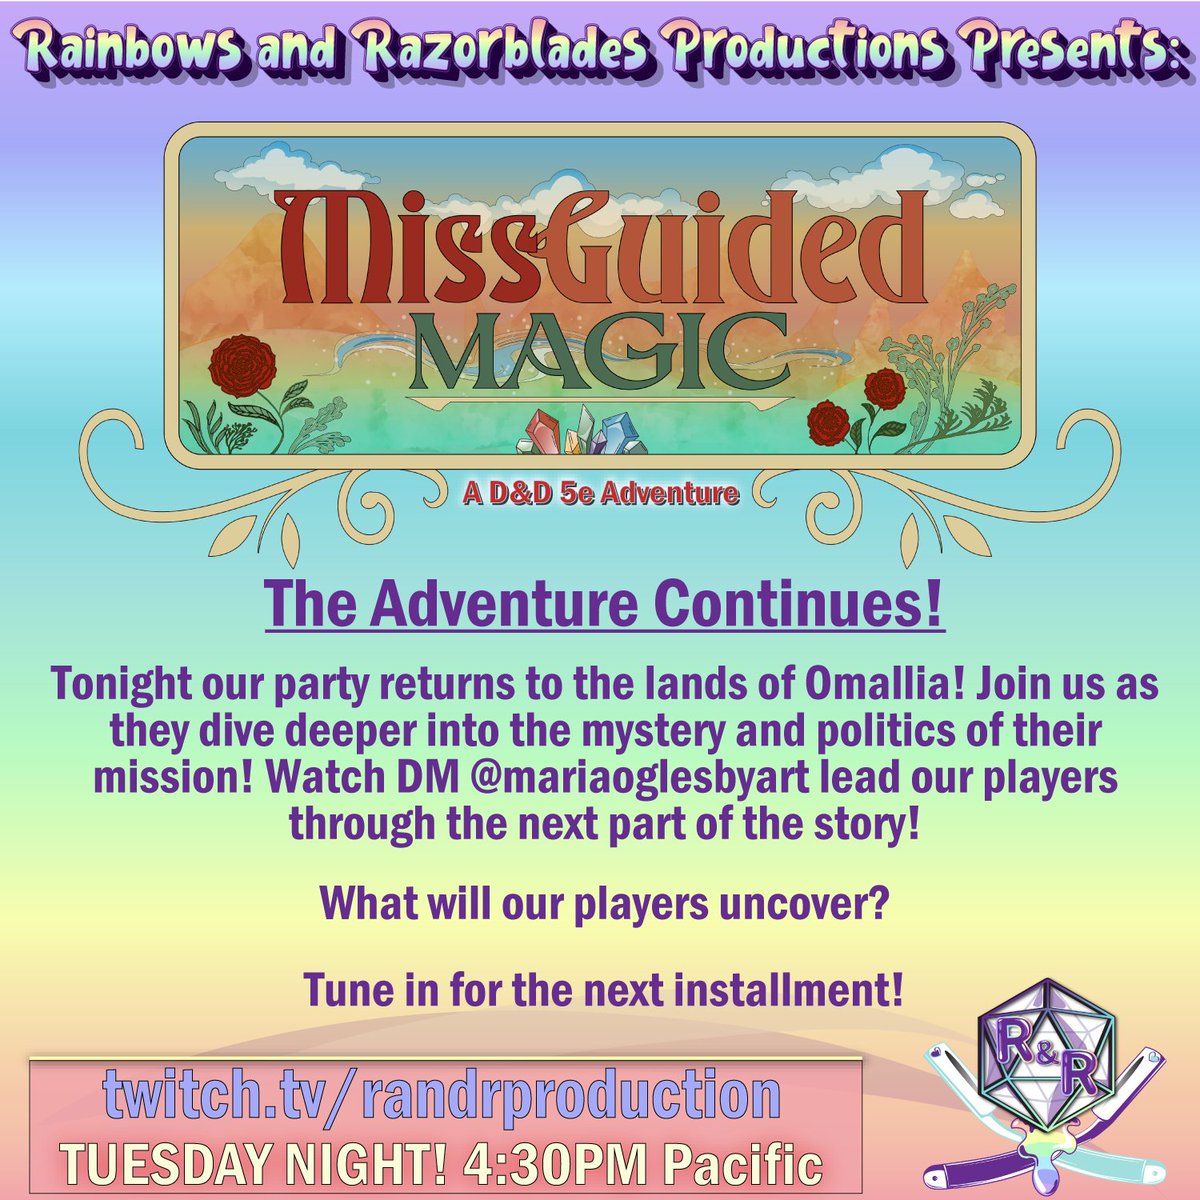 TOMORROW at 4:30PM Pacific! MissGuided Magic continues! What does DM @mariaoglesbyart in this dangerous game of political intrigue? Tune in and find out!

#dnd5e #dungeonsanddragons #ttrpg #tabletopgaming #rpg #roleplaying